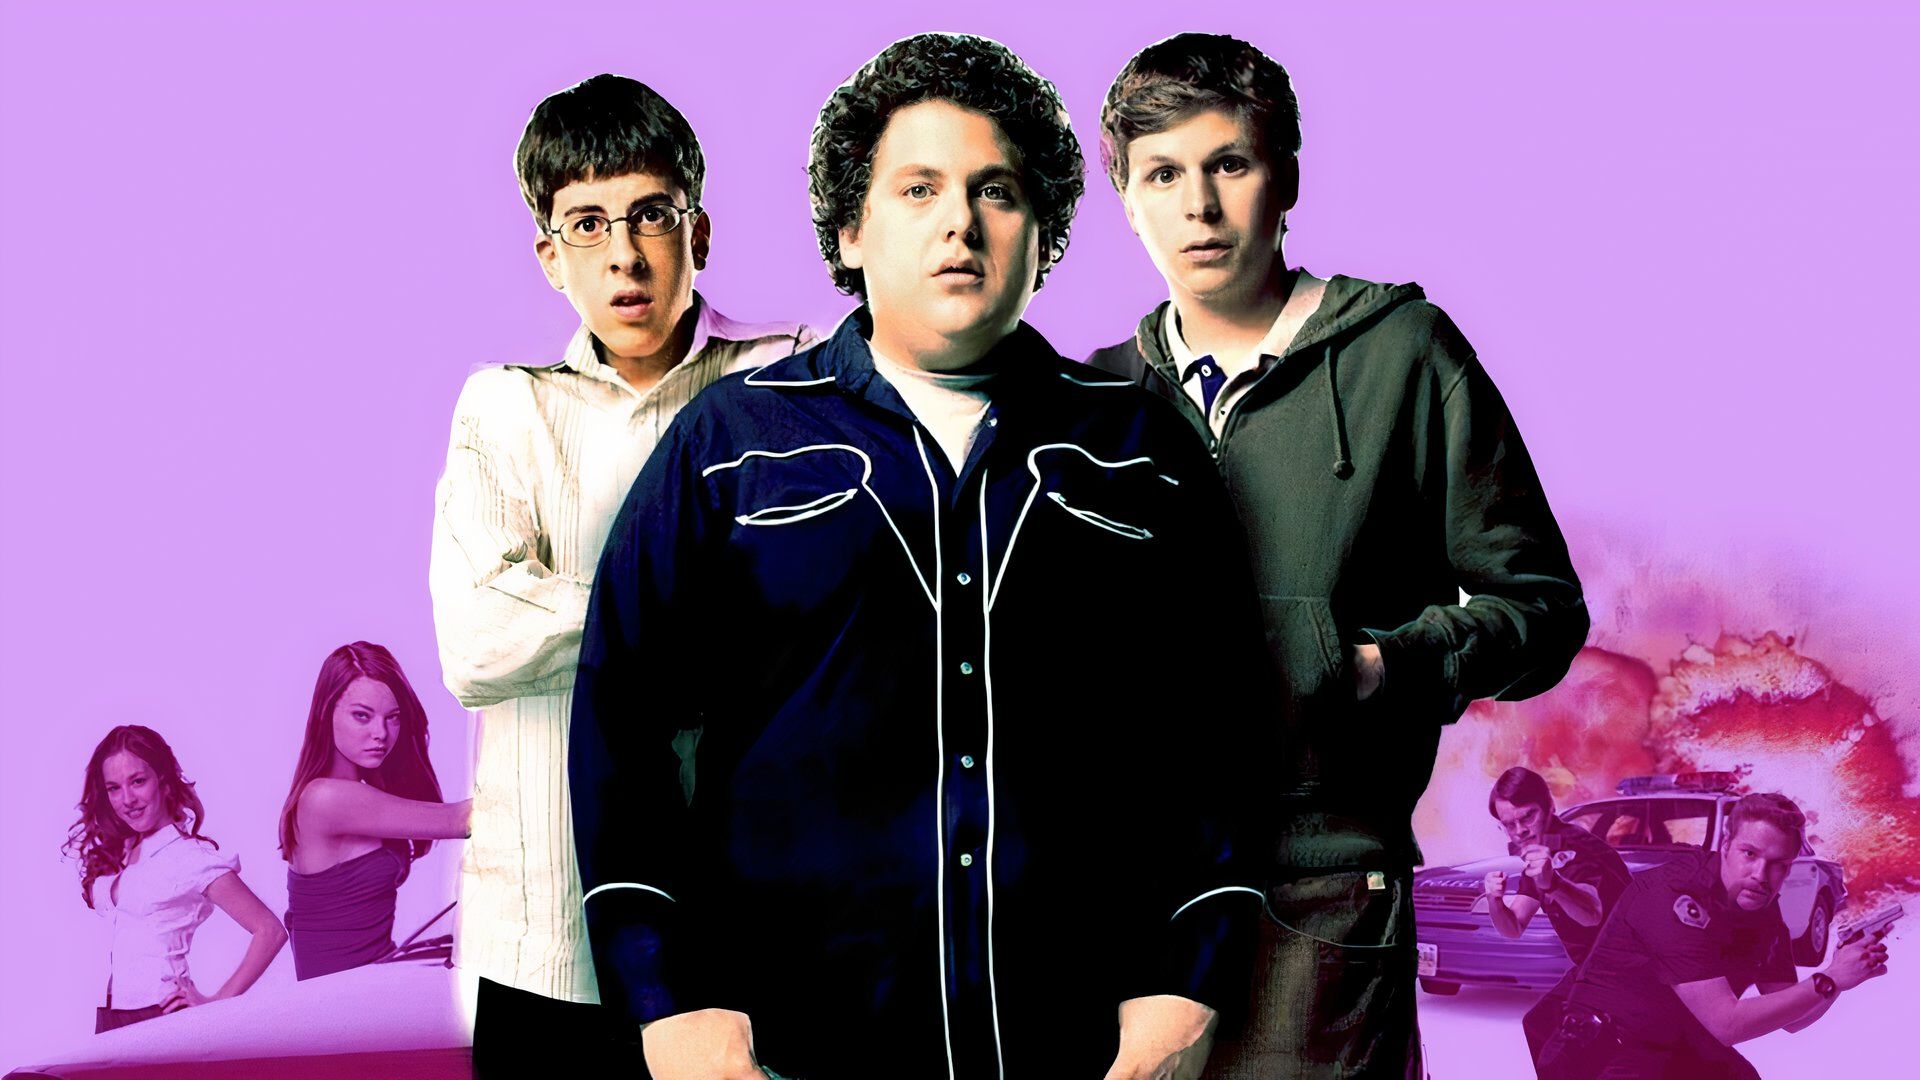 Superbad movie poster cropped to show main cast and colorized